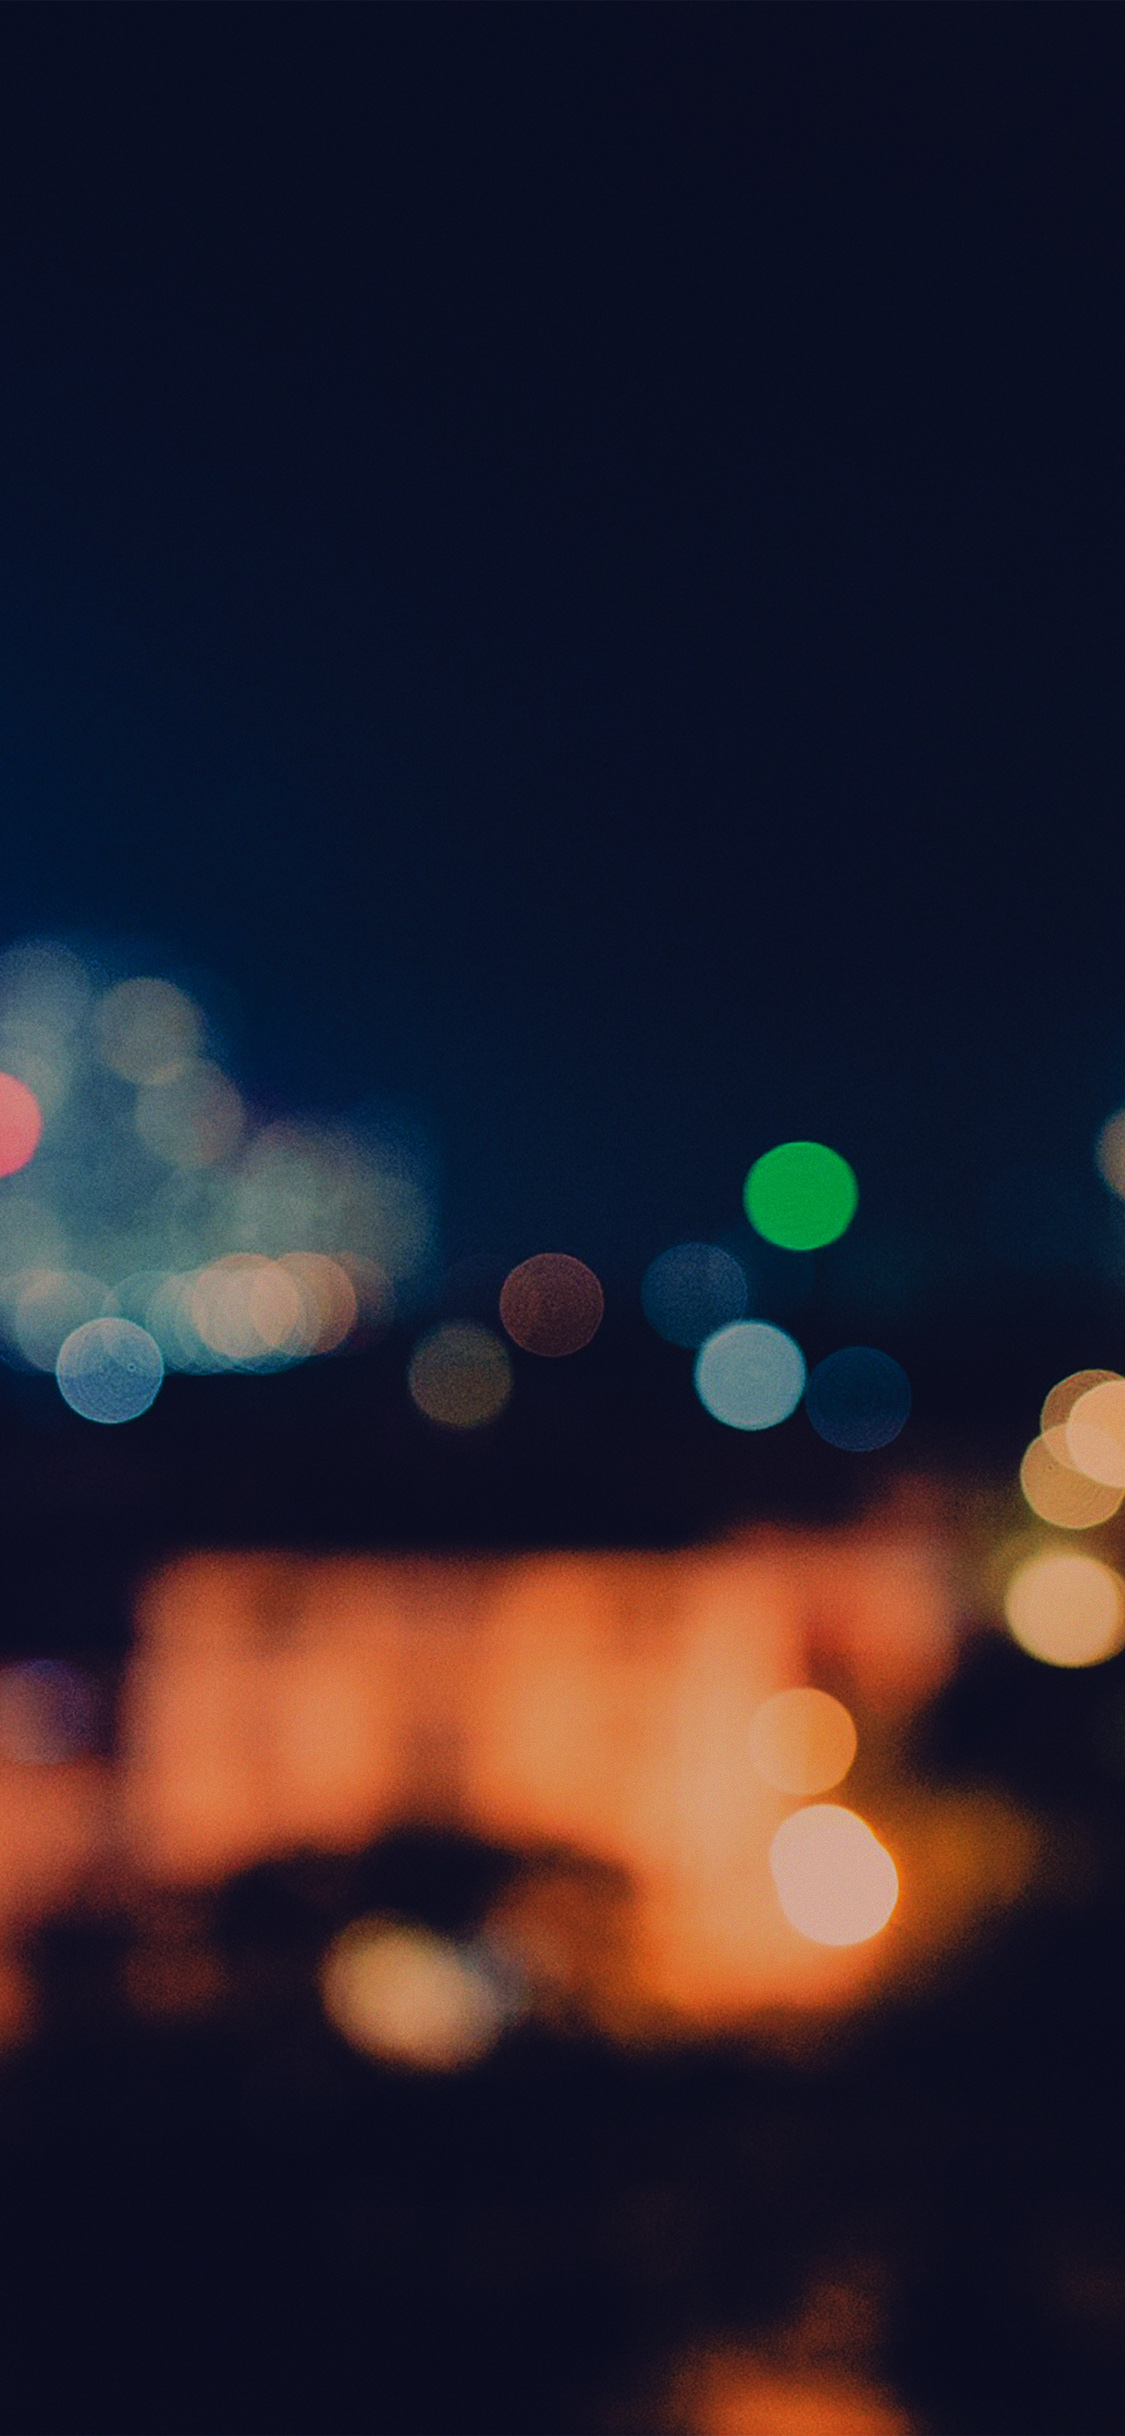 Bokeh wallpapers for iPhone and iPad